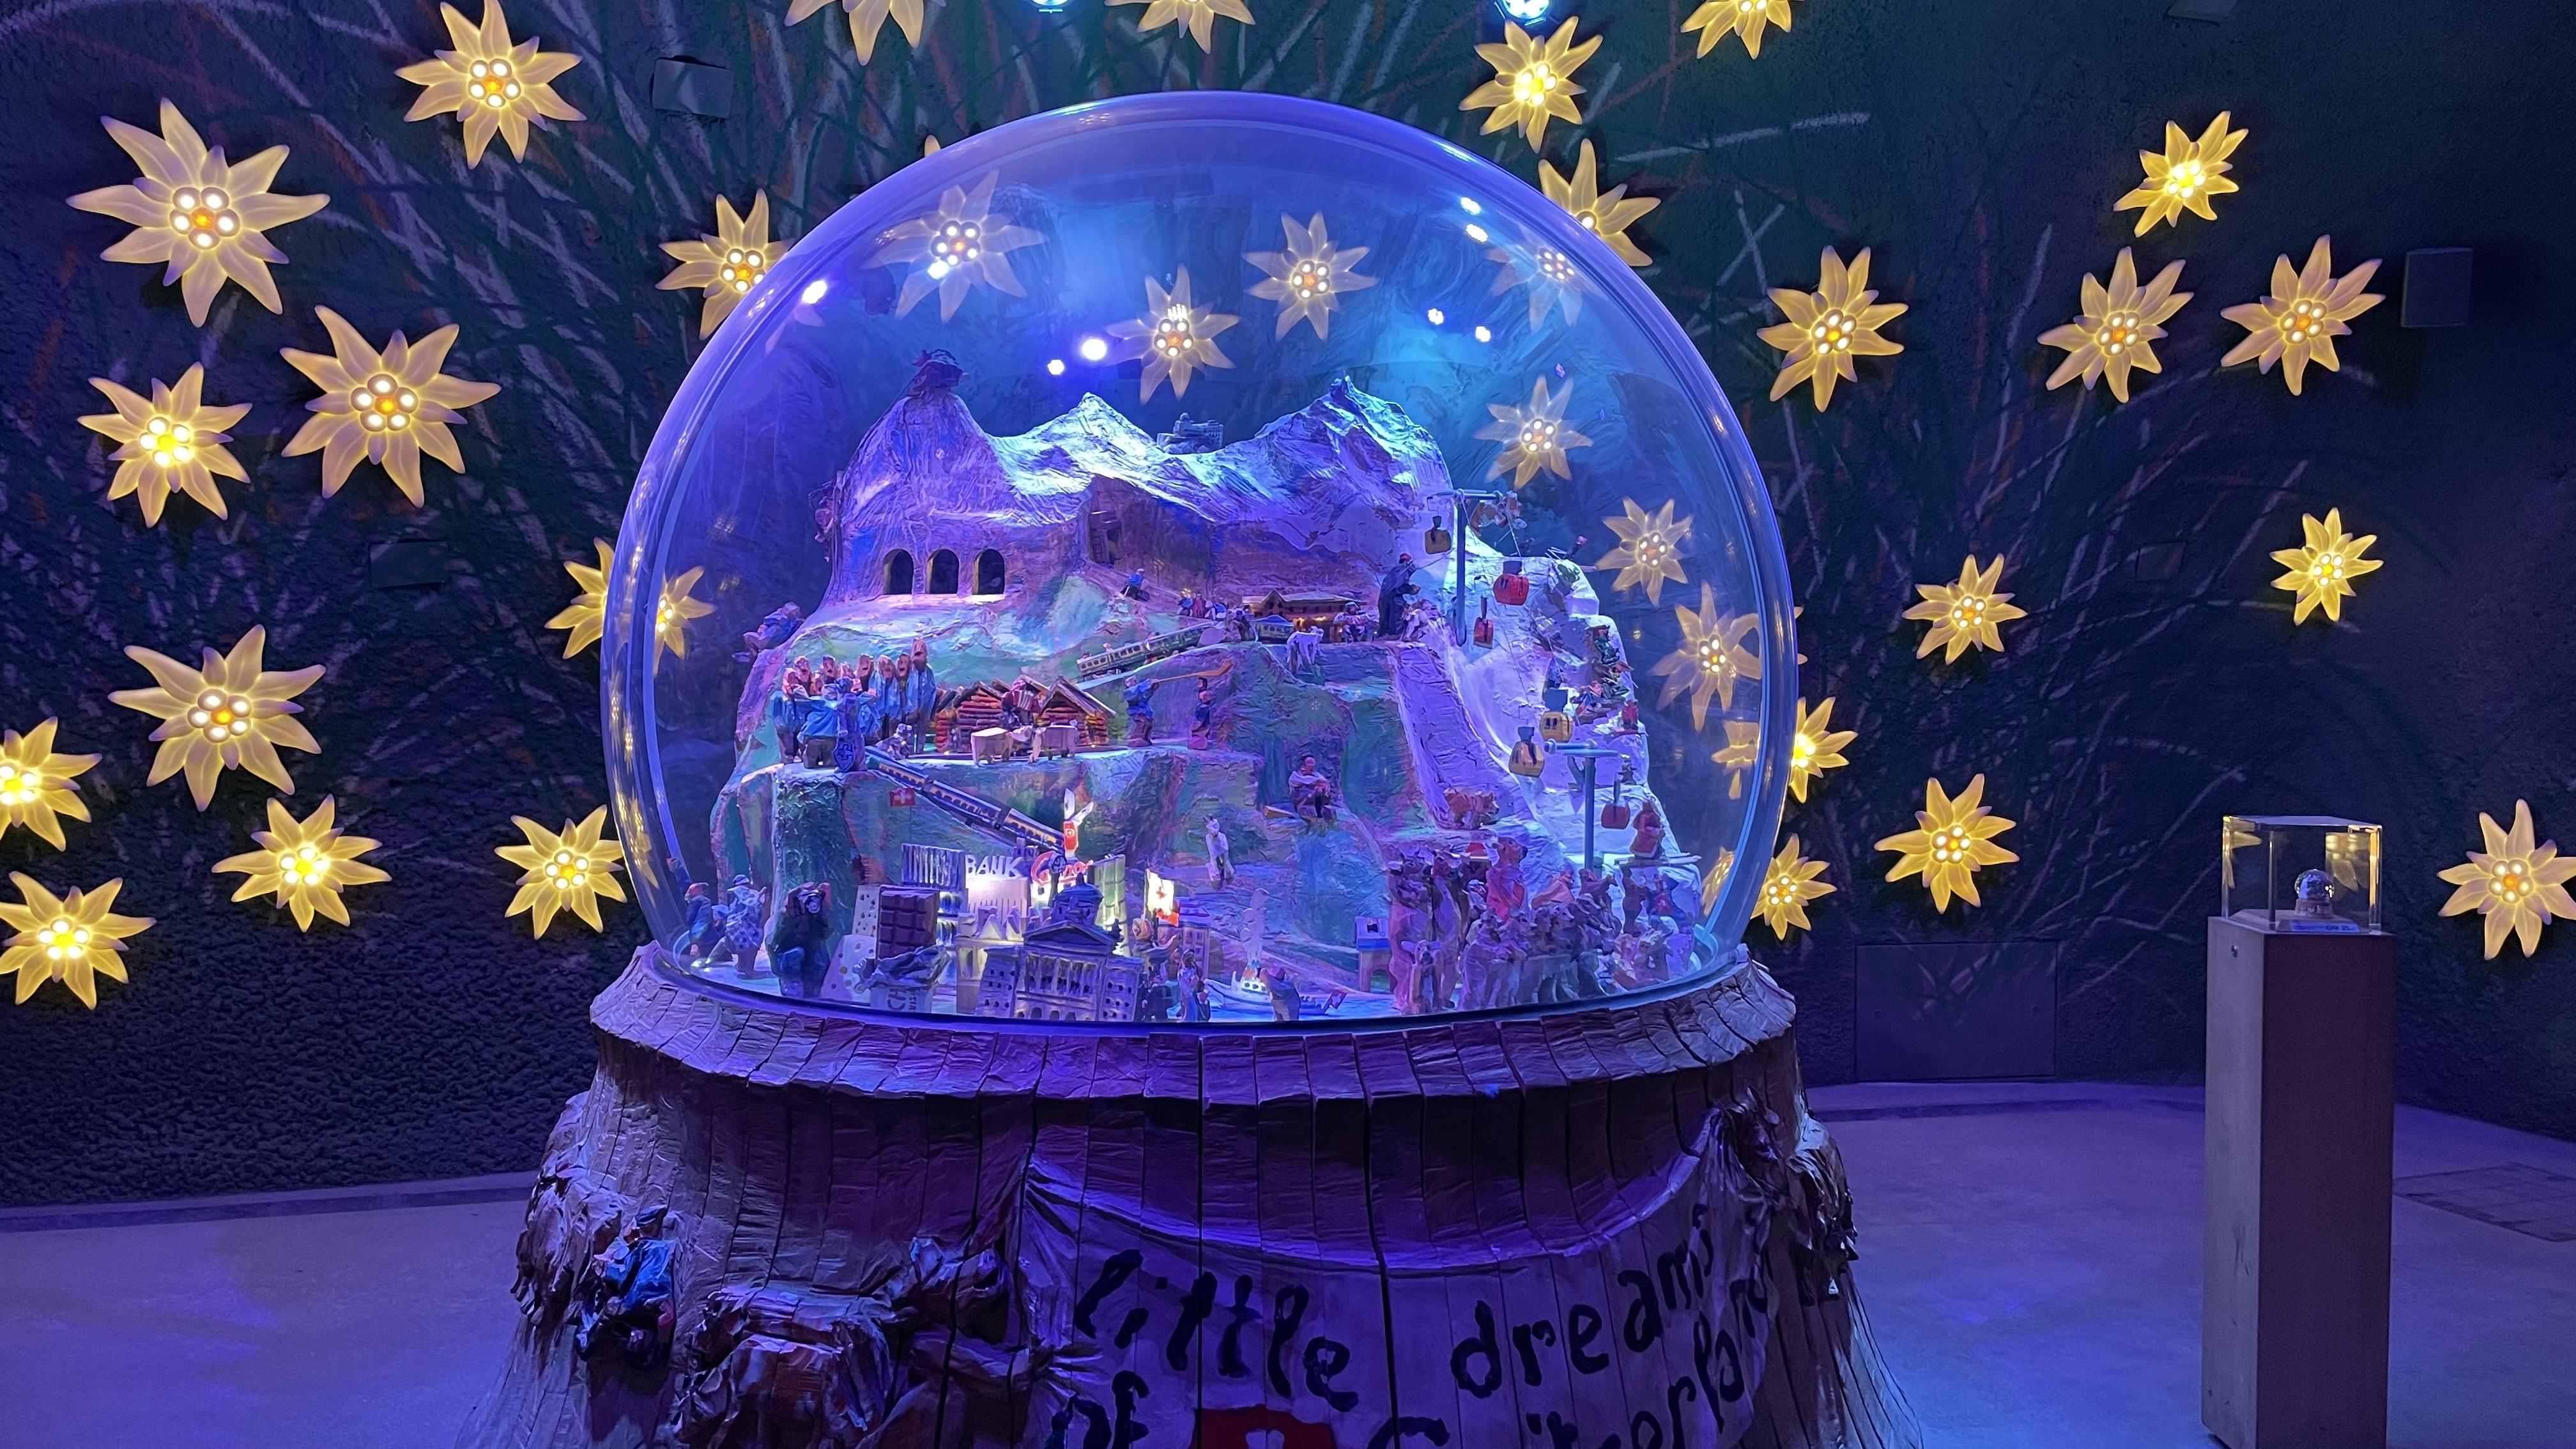 This is the little dream of Switzerland - a big snow globe. - Members  Albums Category - Linus Tech Tips